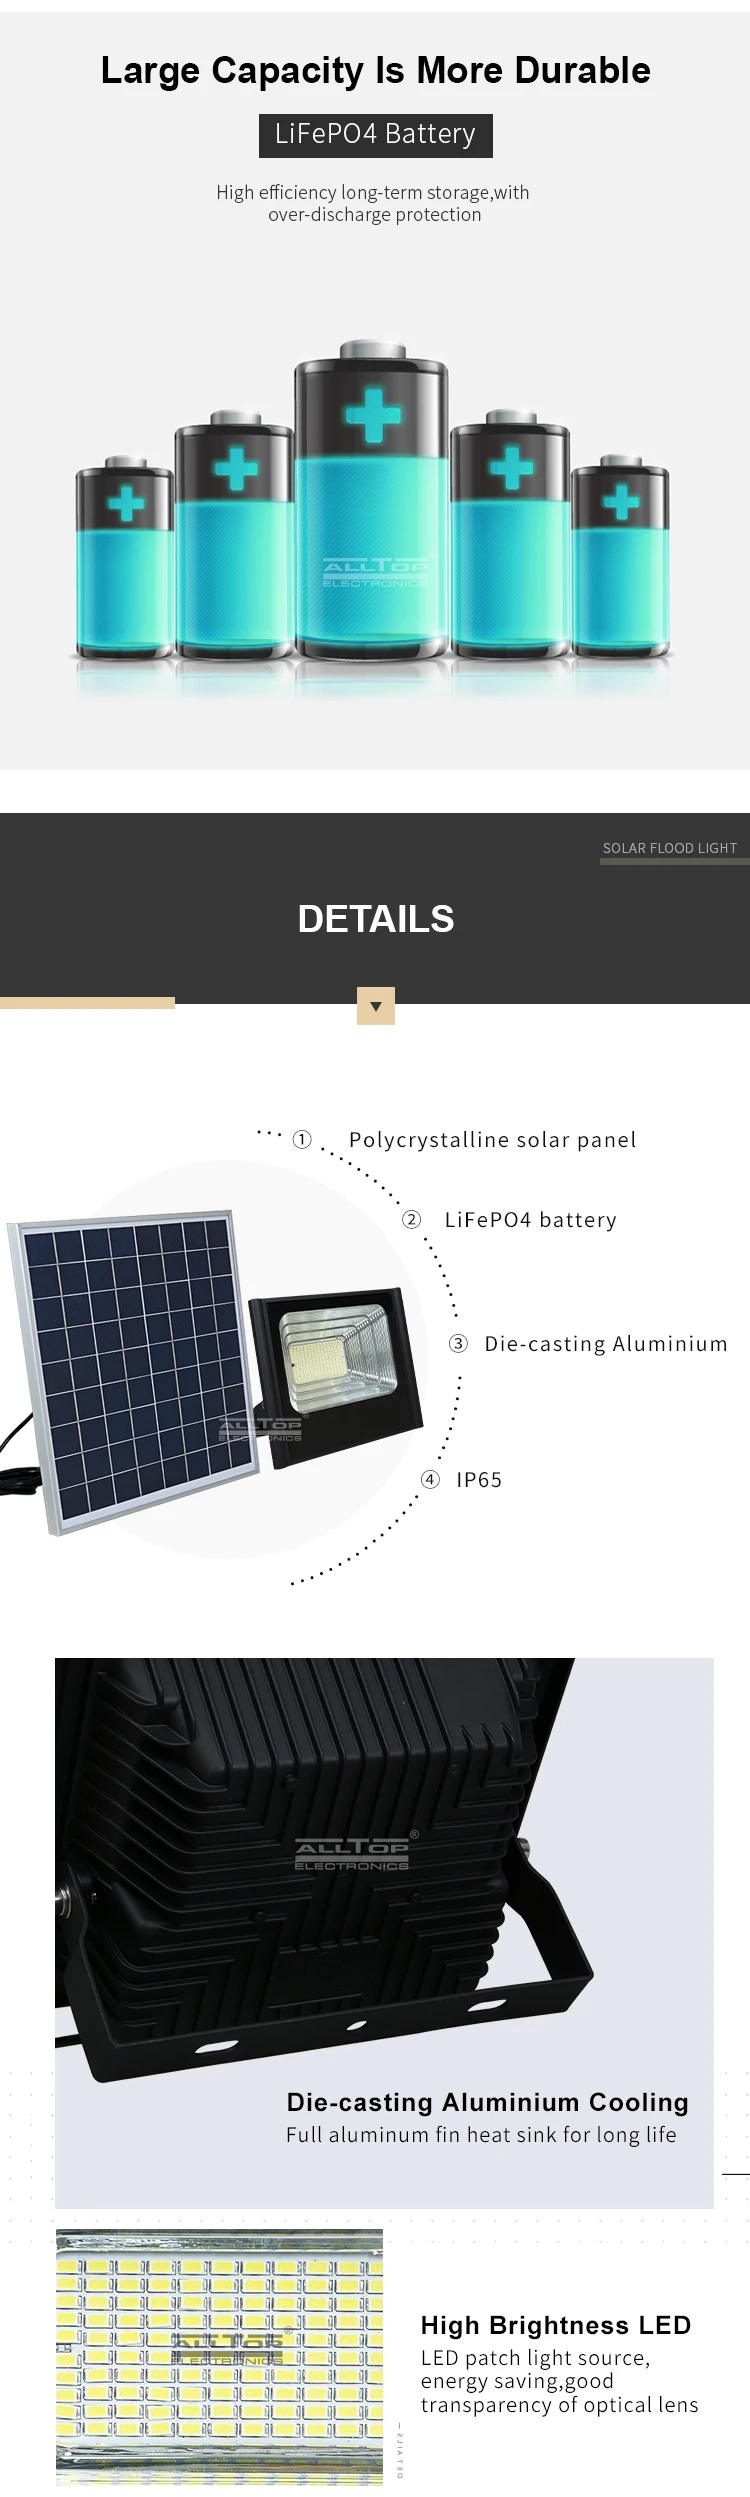 ALLTOP Hot sale high brightness ip66 outdoor portable 50w 100w 150w 200w solar chargeable led solar flood light